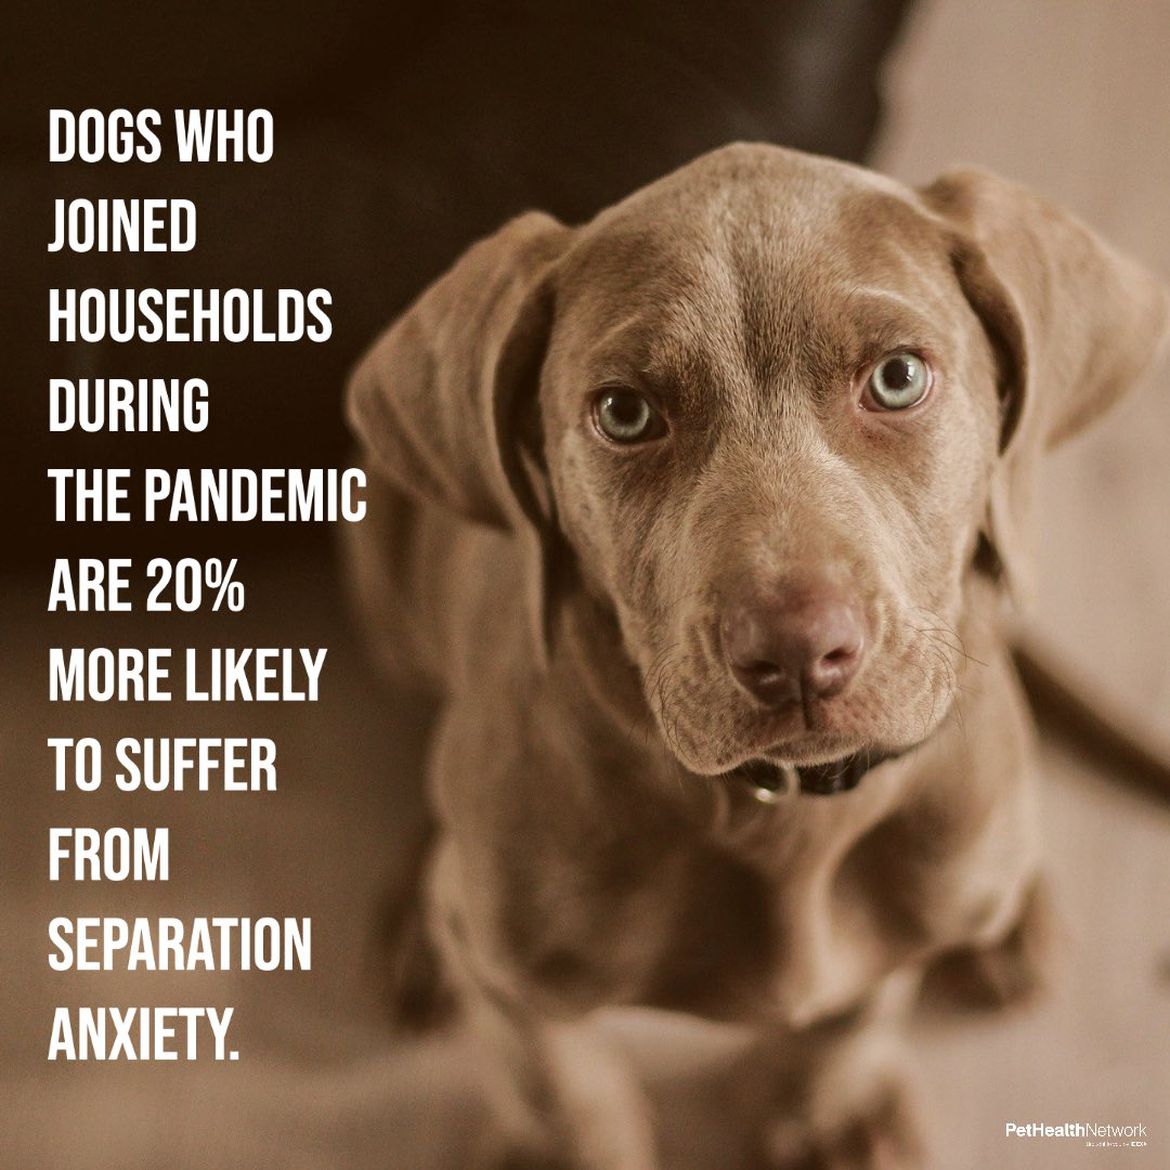 Social media post about separation anxiety for dogs.